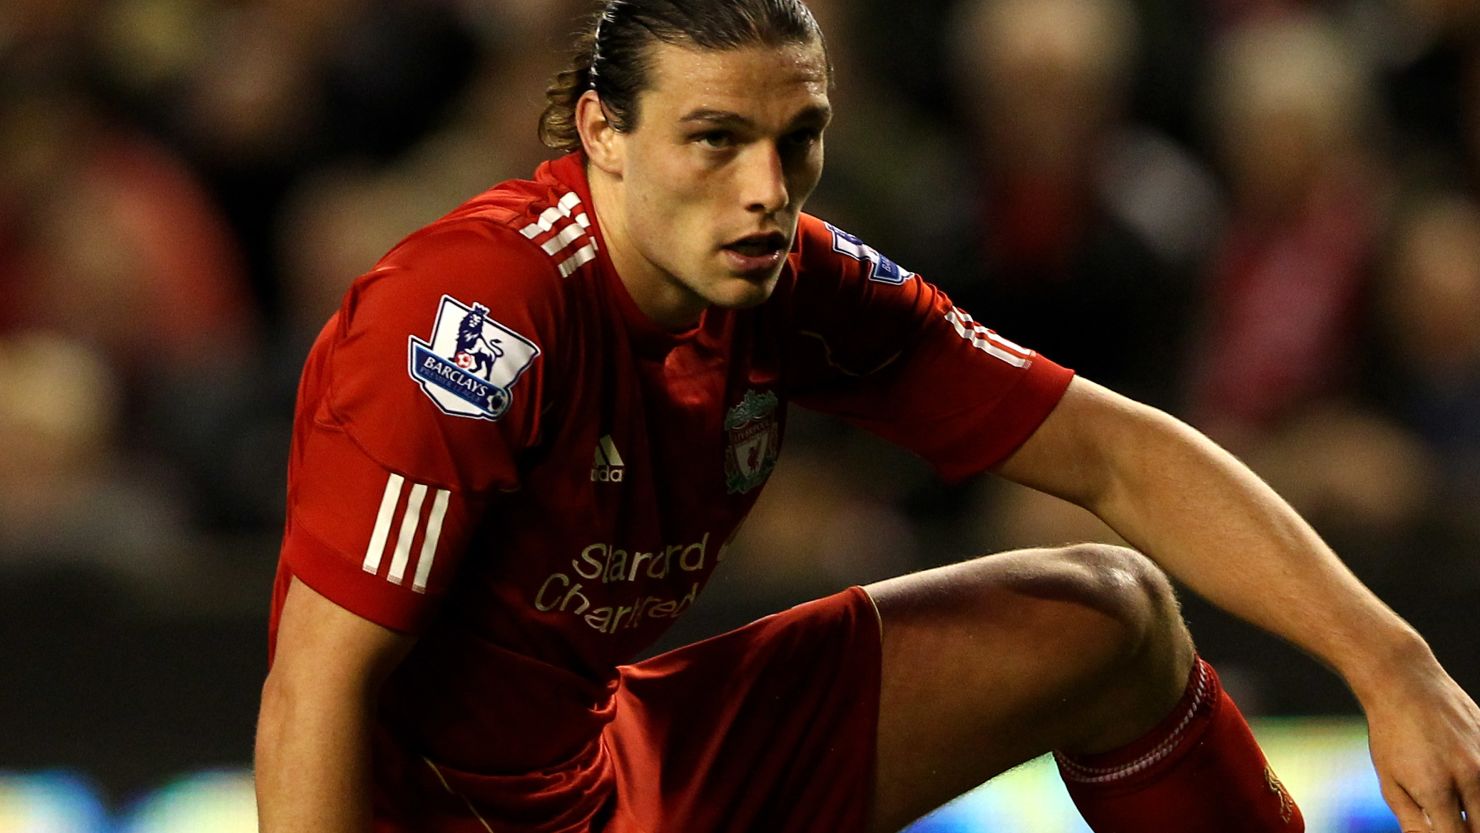 Misfiring Liverpool striker Andy Carroll failed to add to his four goals in the Premier League this season